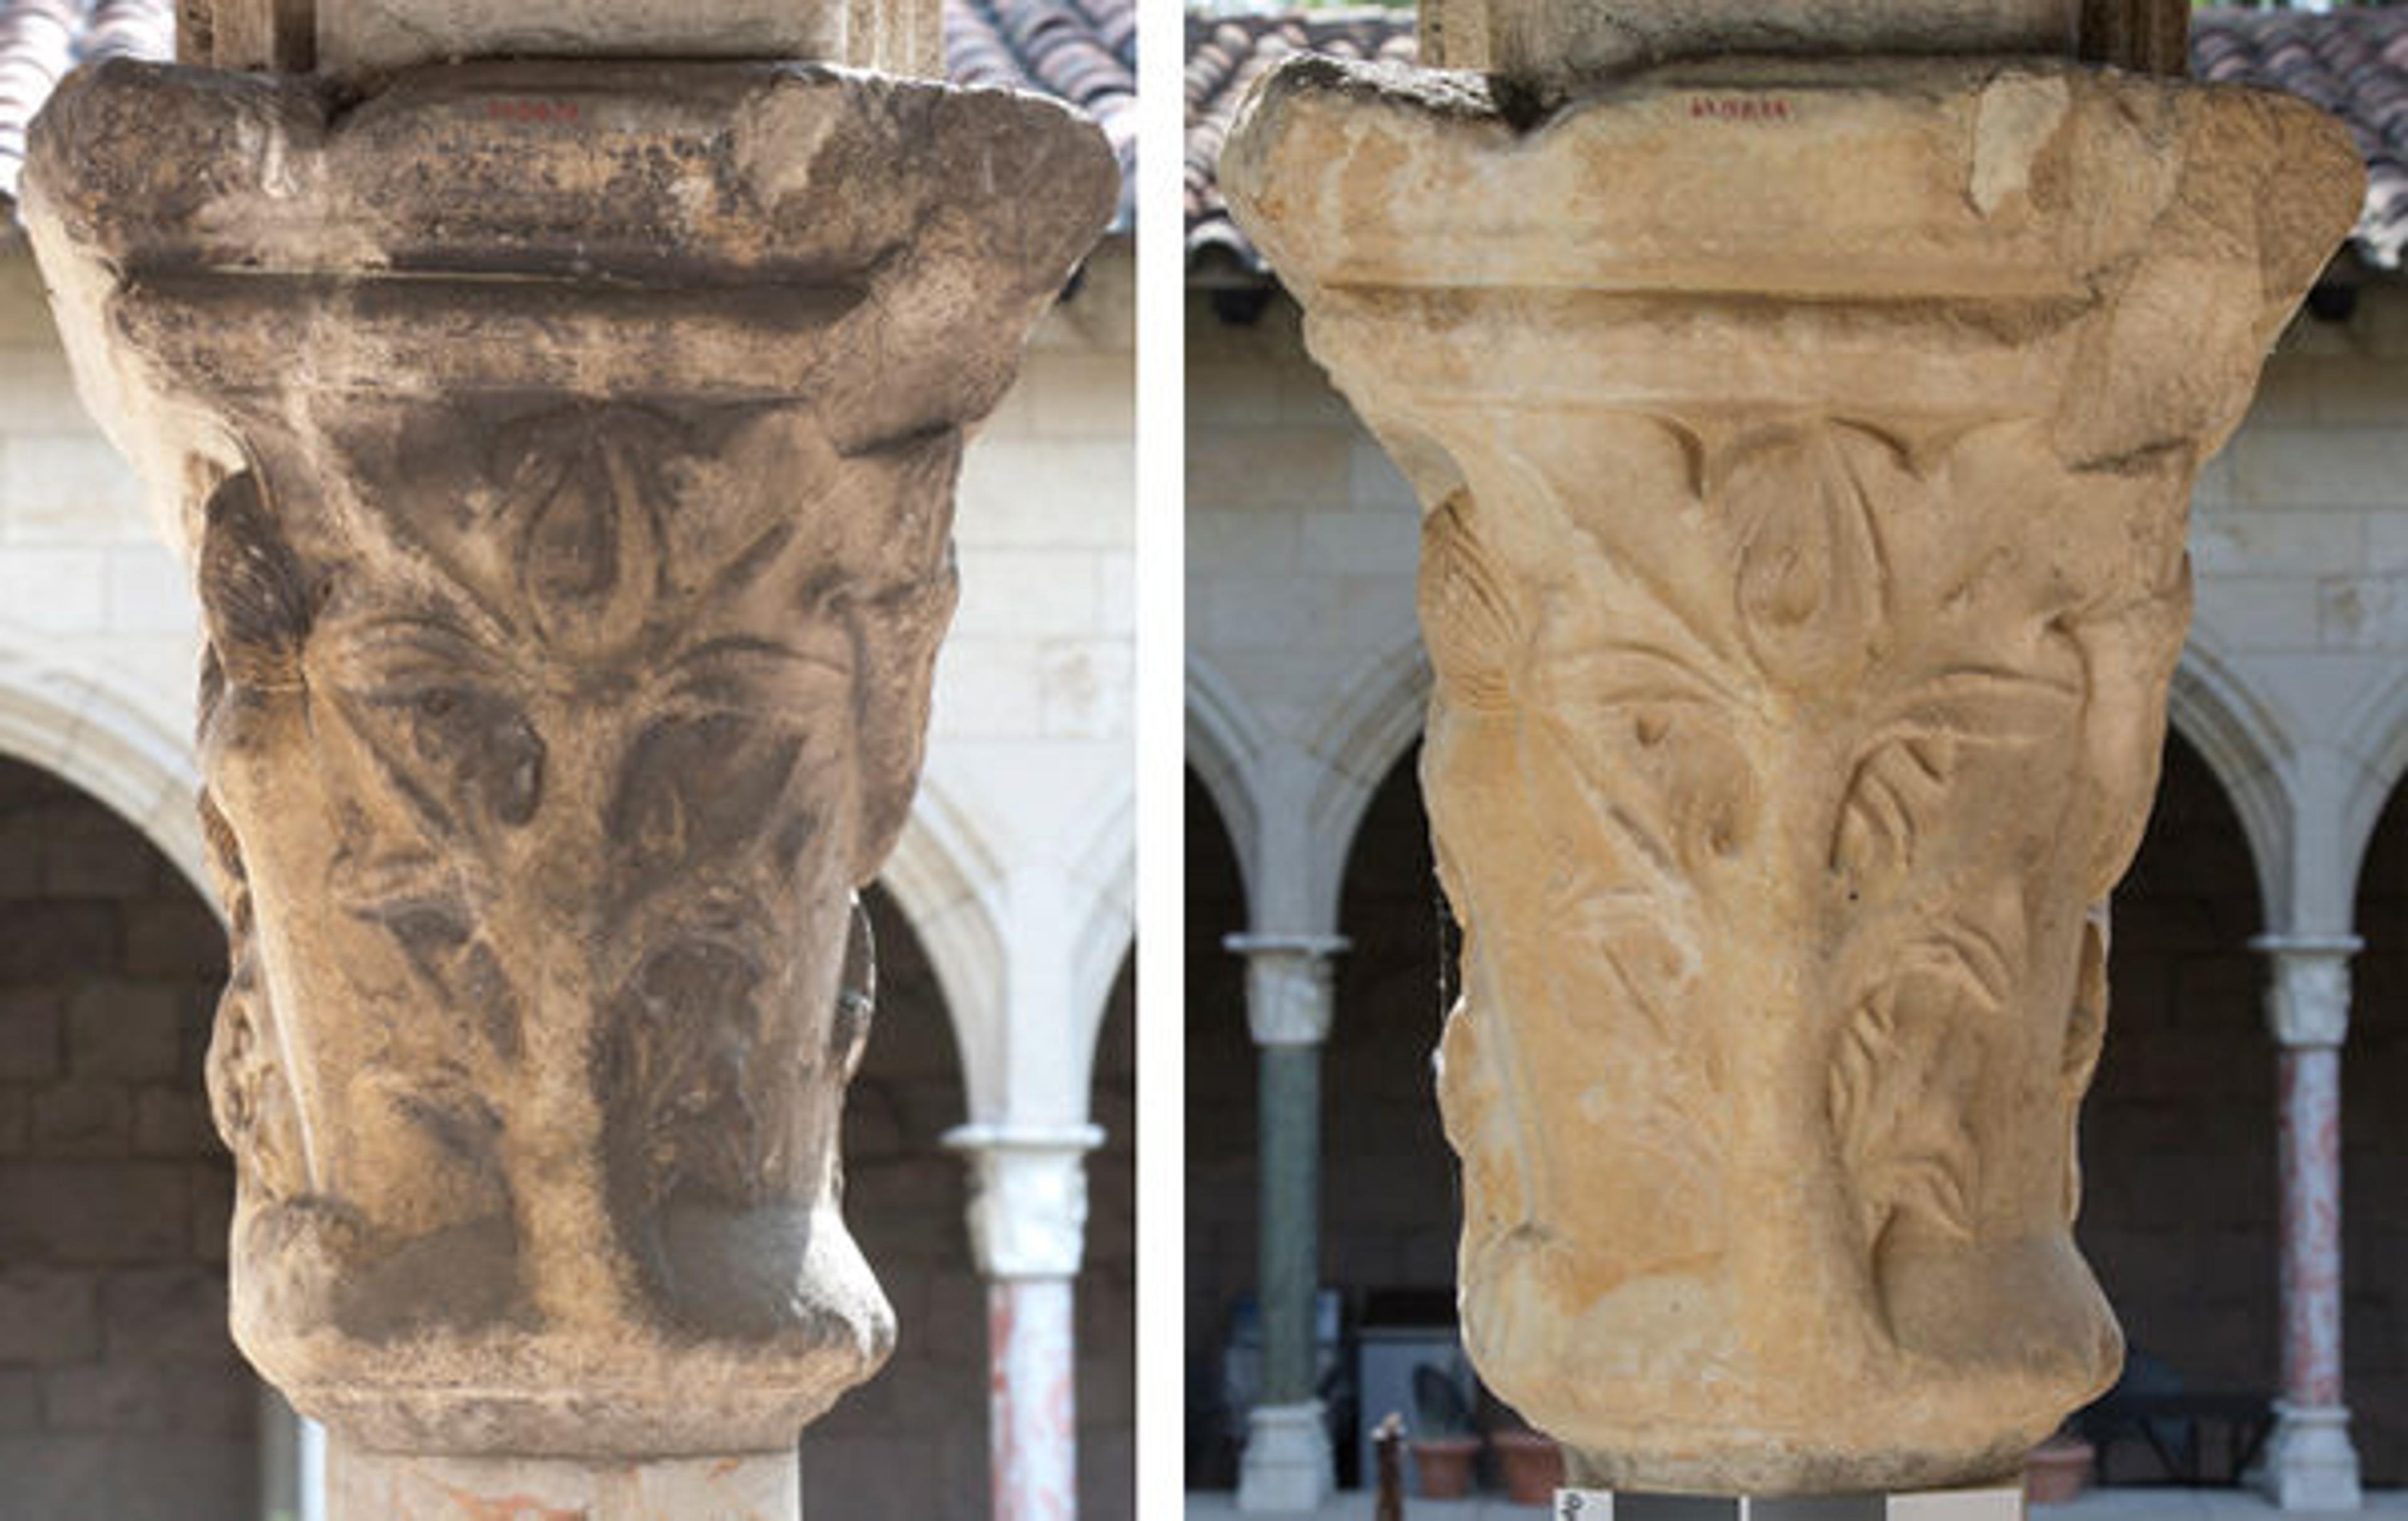 Capital 67.155.25, West arcade, Trie cloister before and after laser cleaning